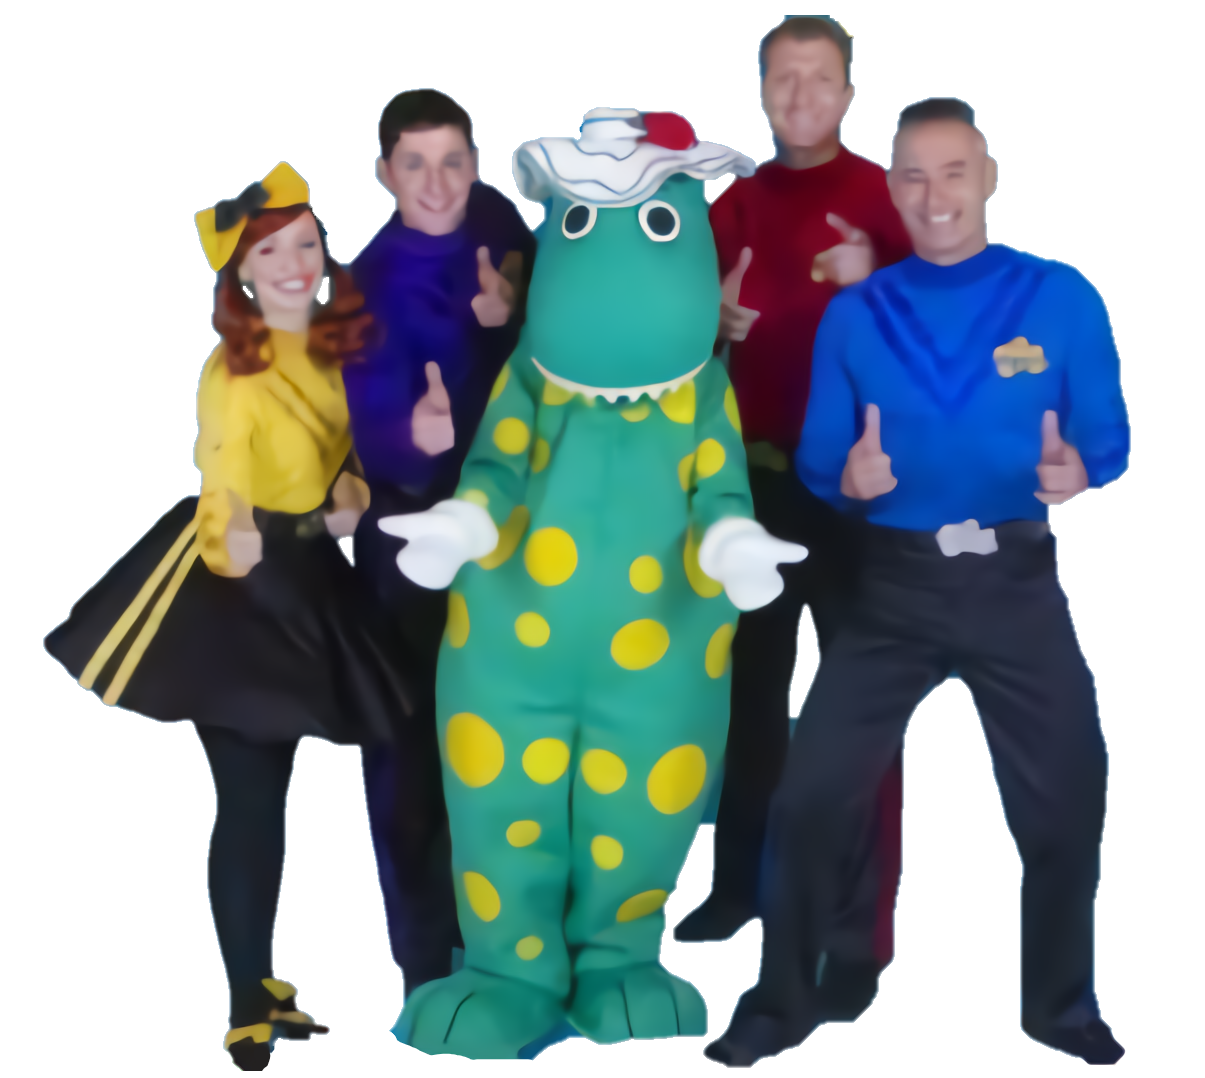 The Wiggles With Dorothy The Dinosaur 2014 By Trevorhines On Deviantart